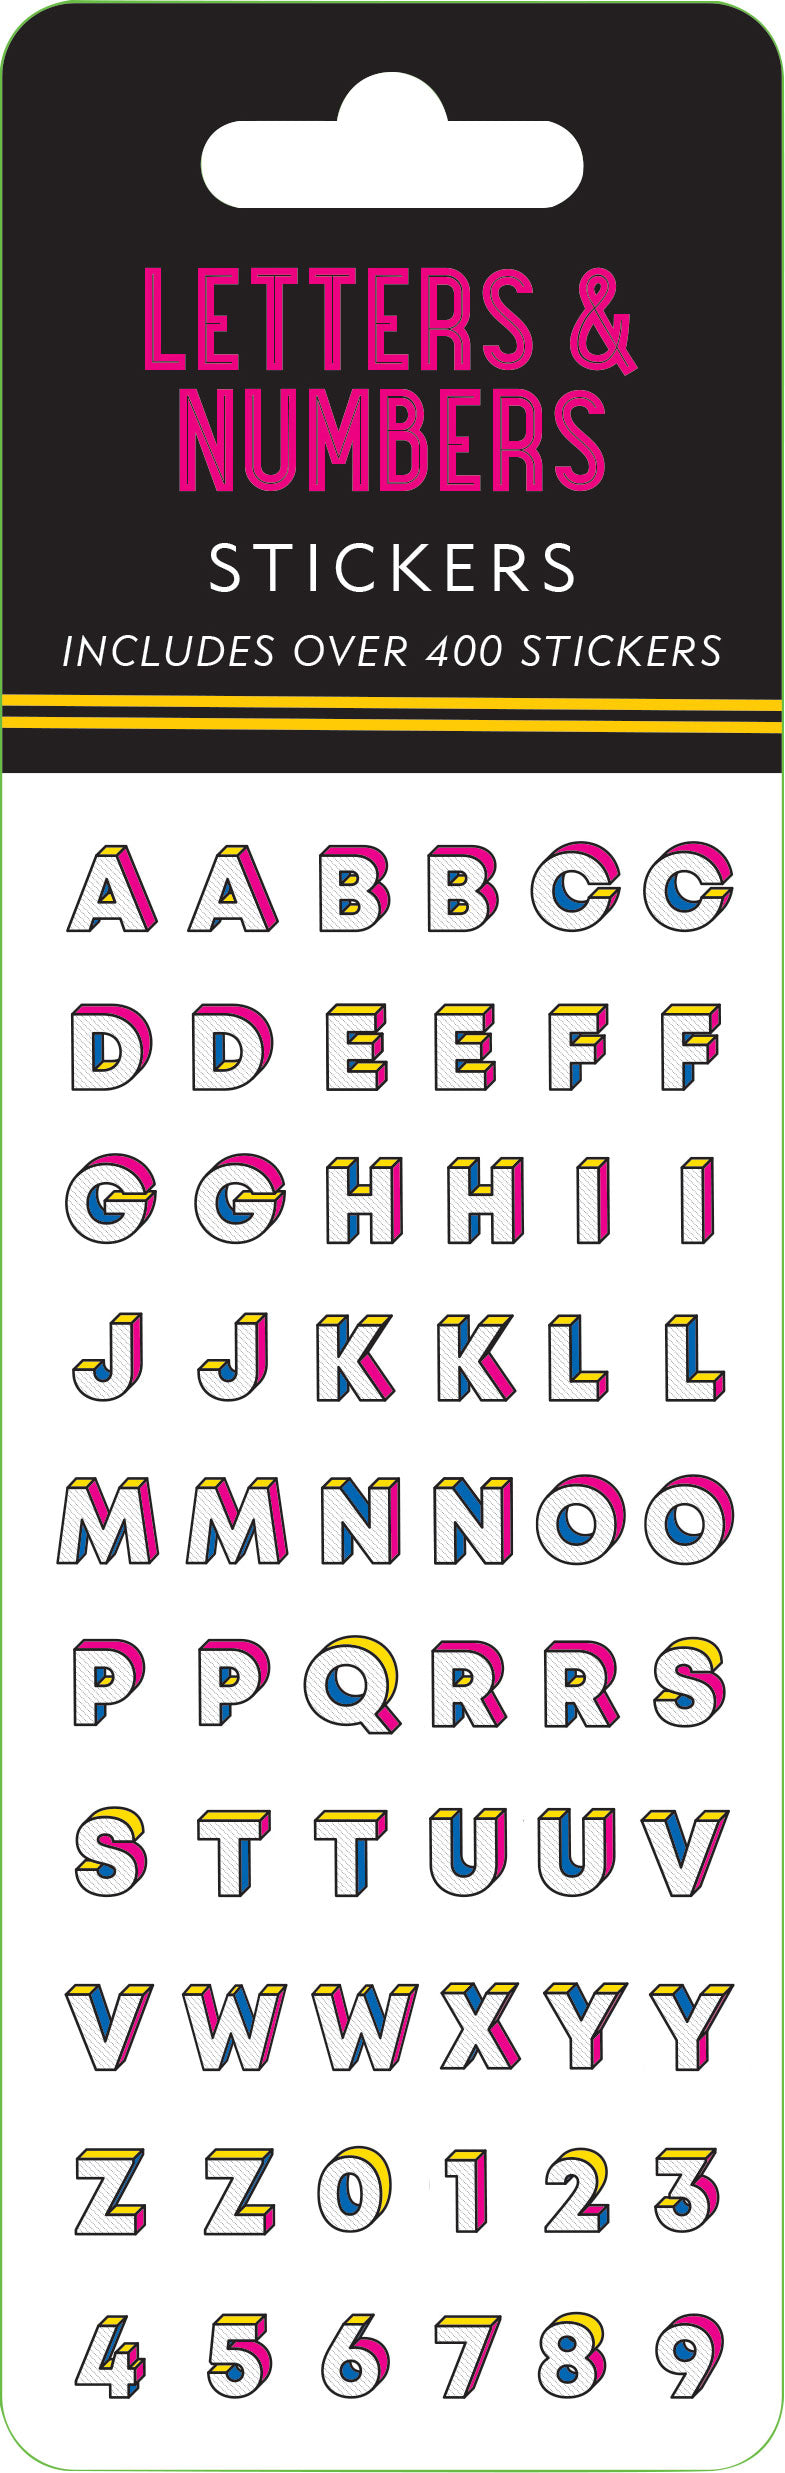 Letters & Numbers Sticker Set